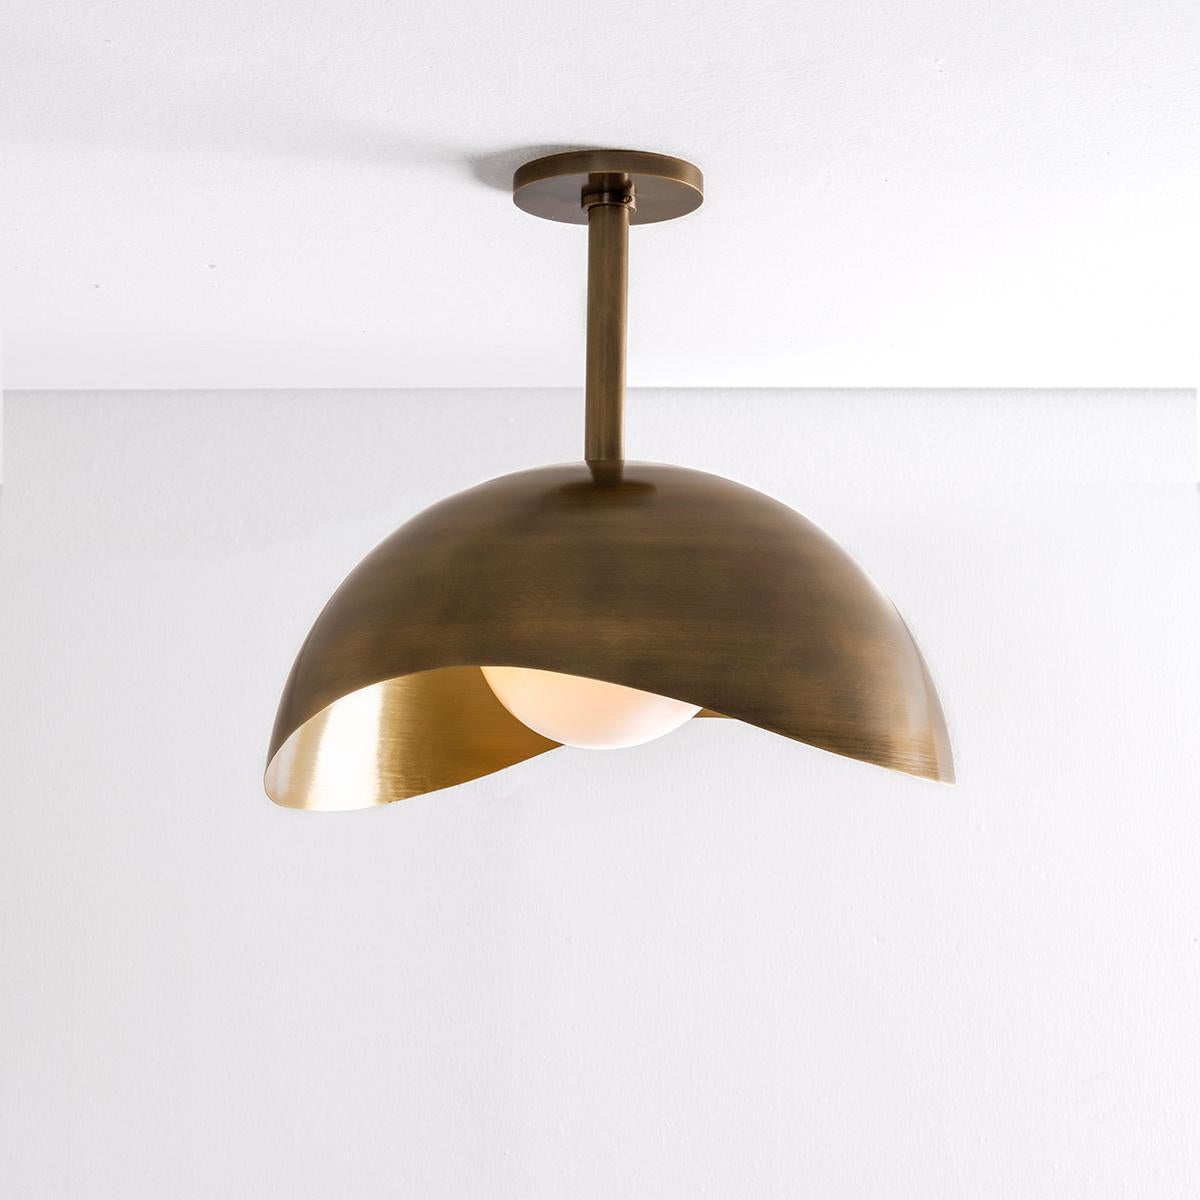 Perla Grande Ceiling Light - Satin Brass Interior and Bronze Exterior In New Condition For Sale In New York, NY